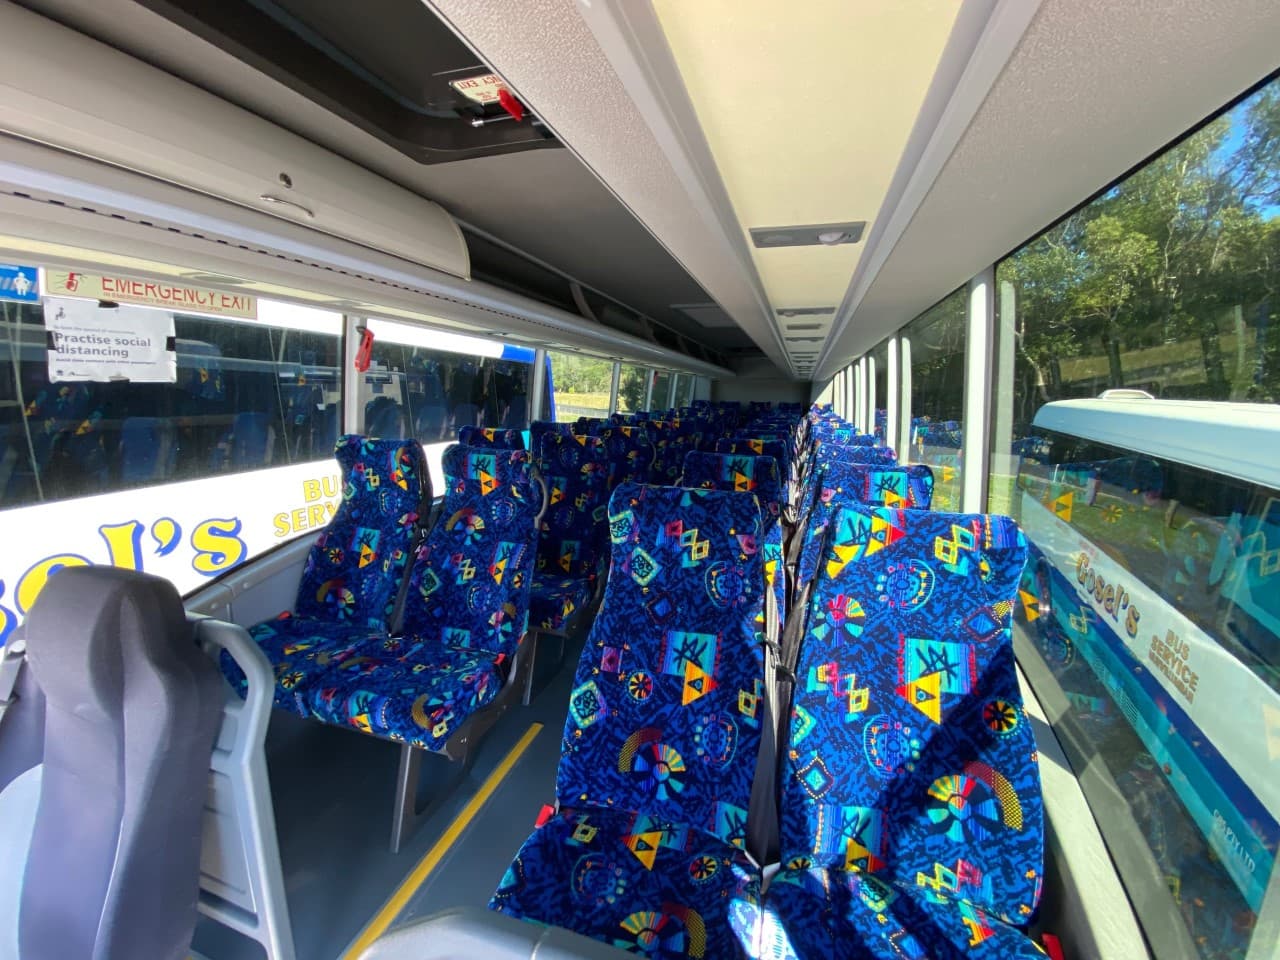 Comfortable and Clean Bus Interior — Bus Service Operates in the Tweed Shire, NSW